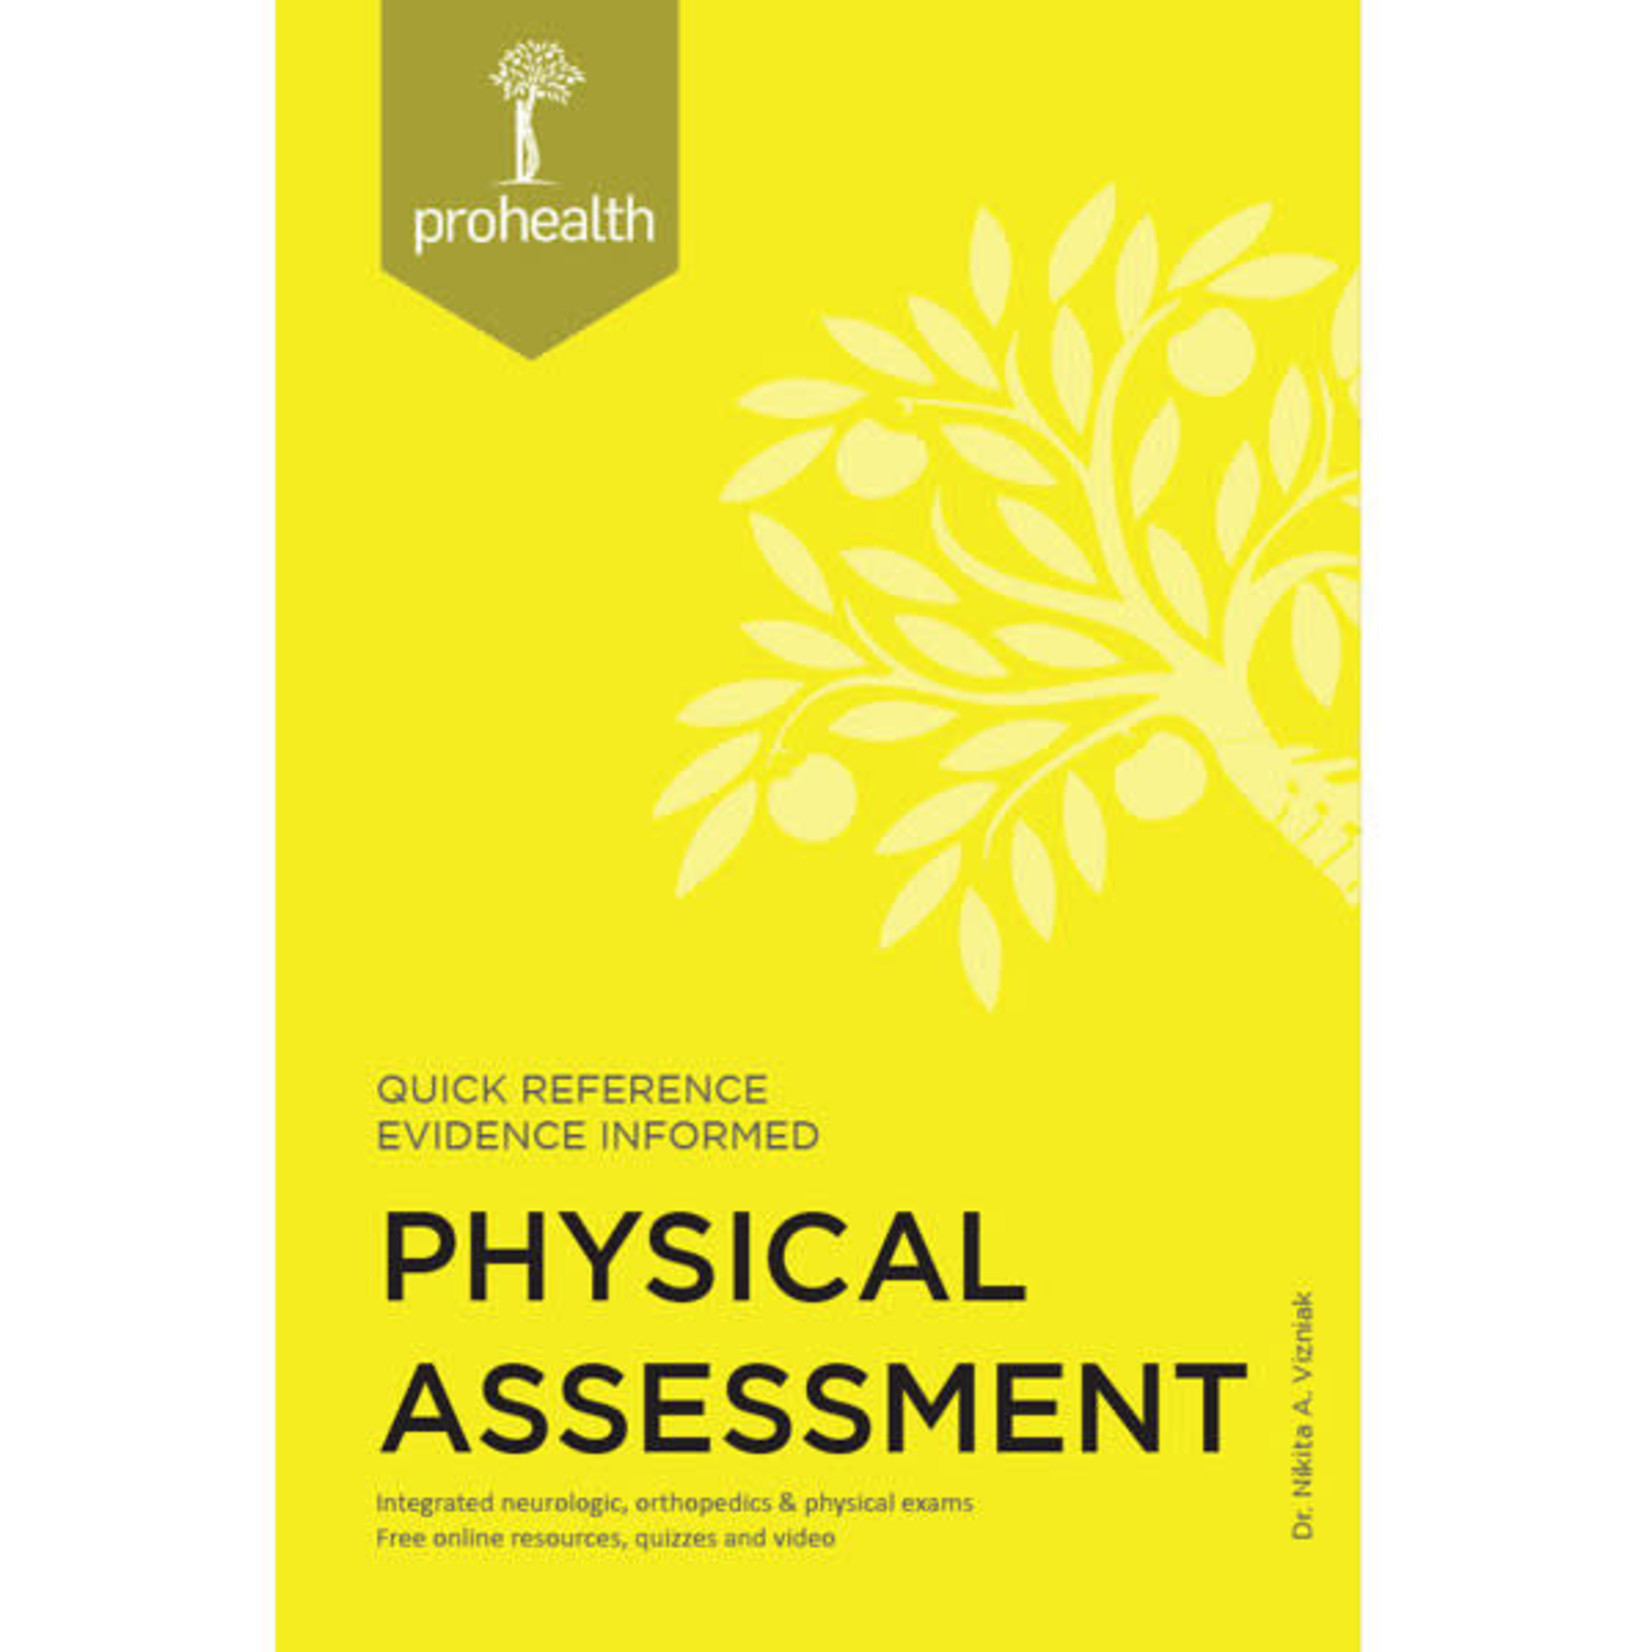 PROHEALTHSYS PROHEALTH ORTHOPEDIC ASSESSMENT (FORMERLY PHYSICAL ASSESSMENT)